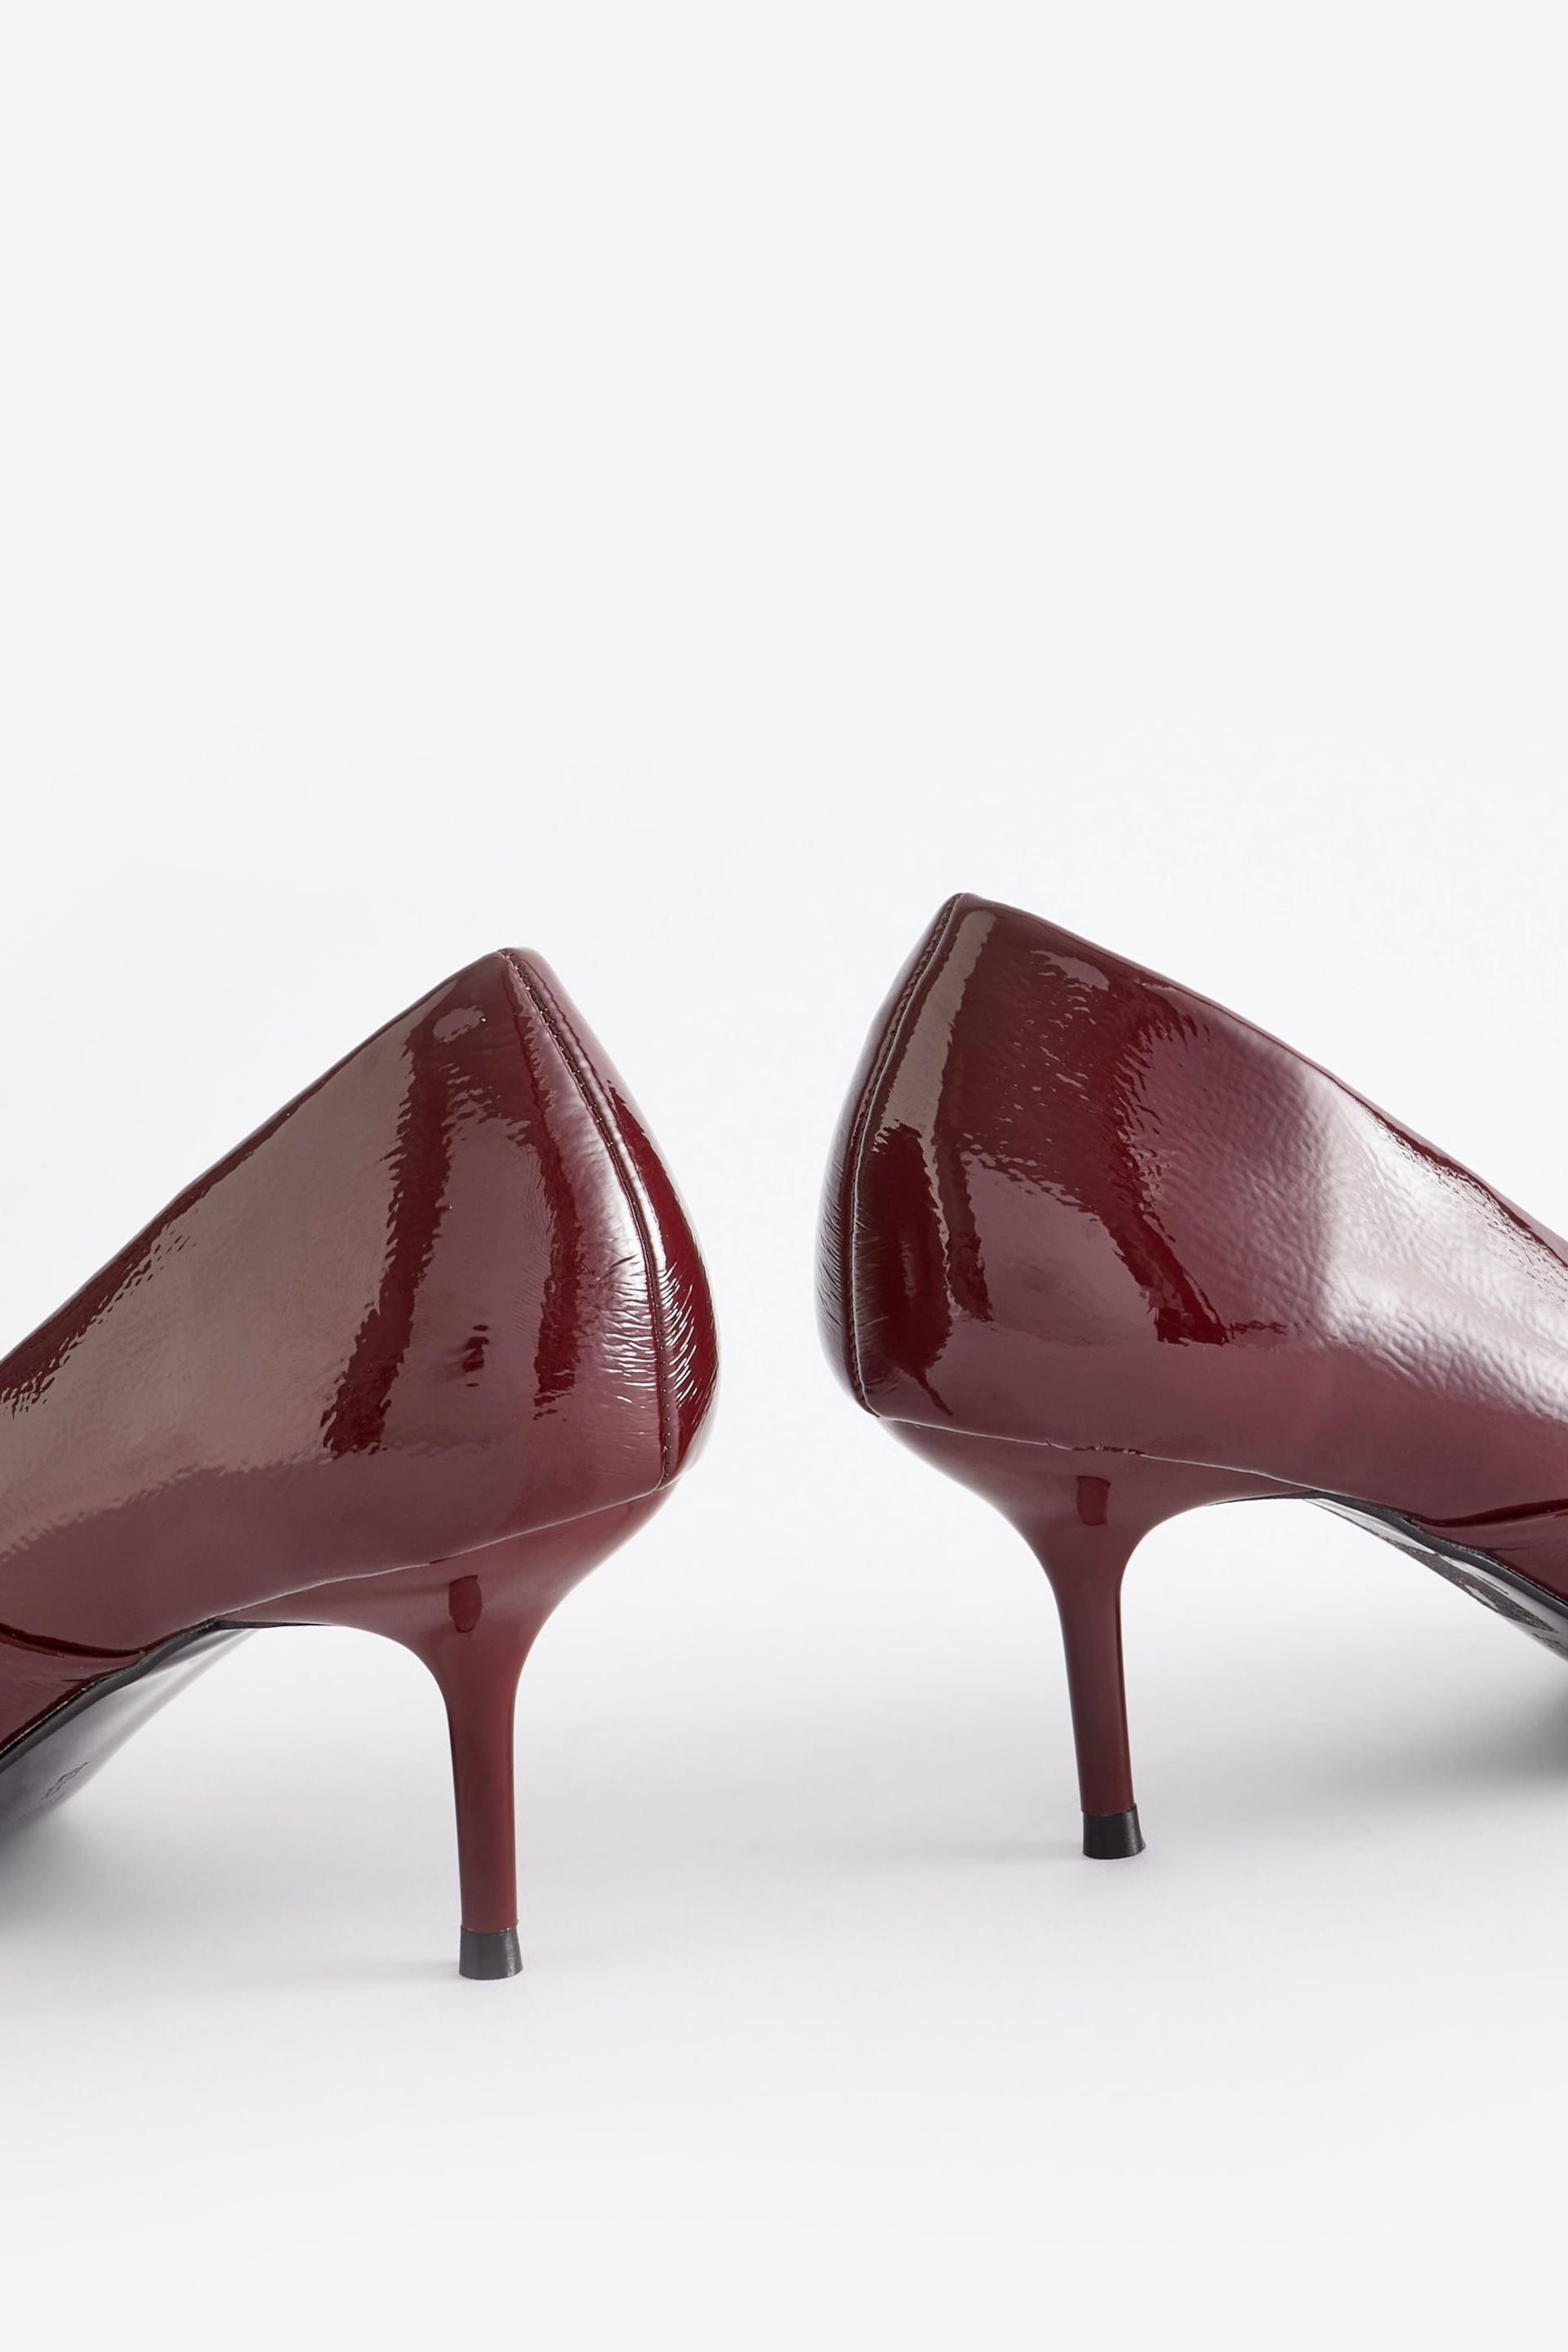 Berry Red Forever Comfort® Asymmetric Bow Kitten Heels - Image 8 of 11